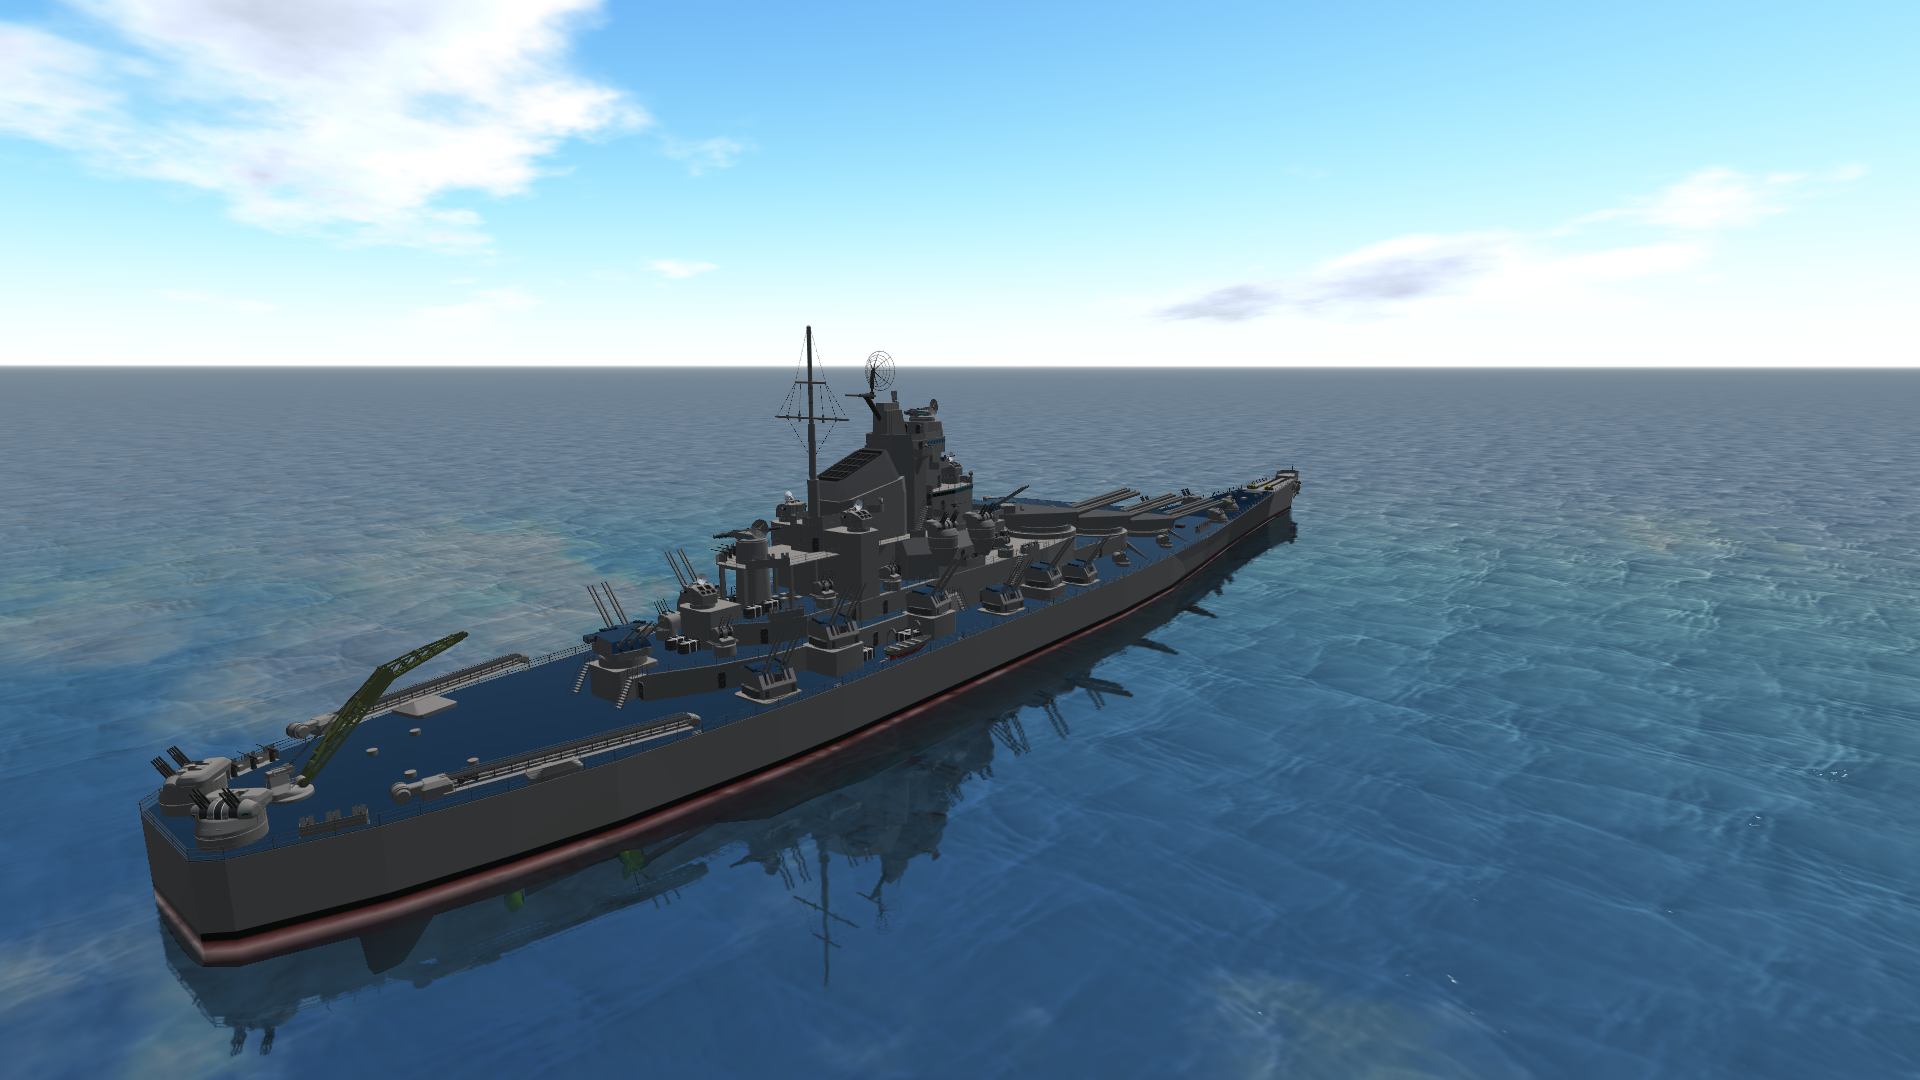 Pacific Warships for mac download